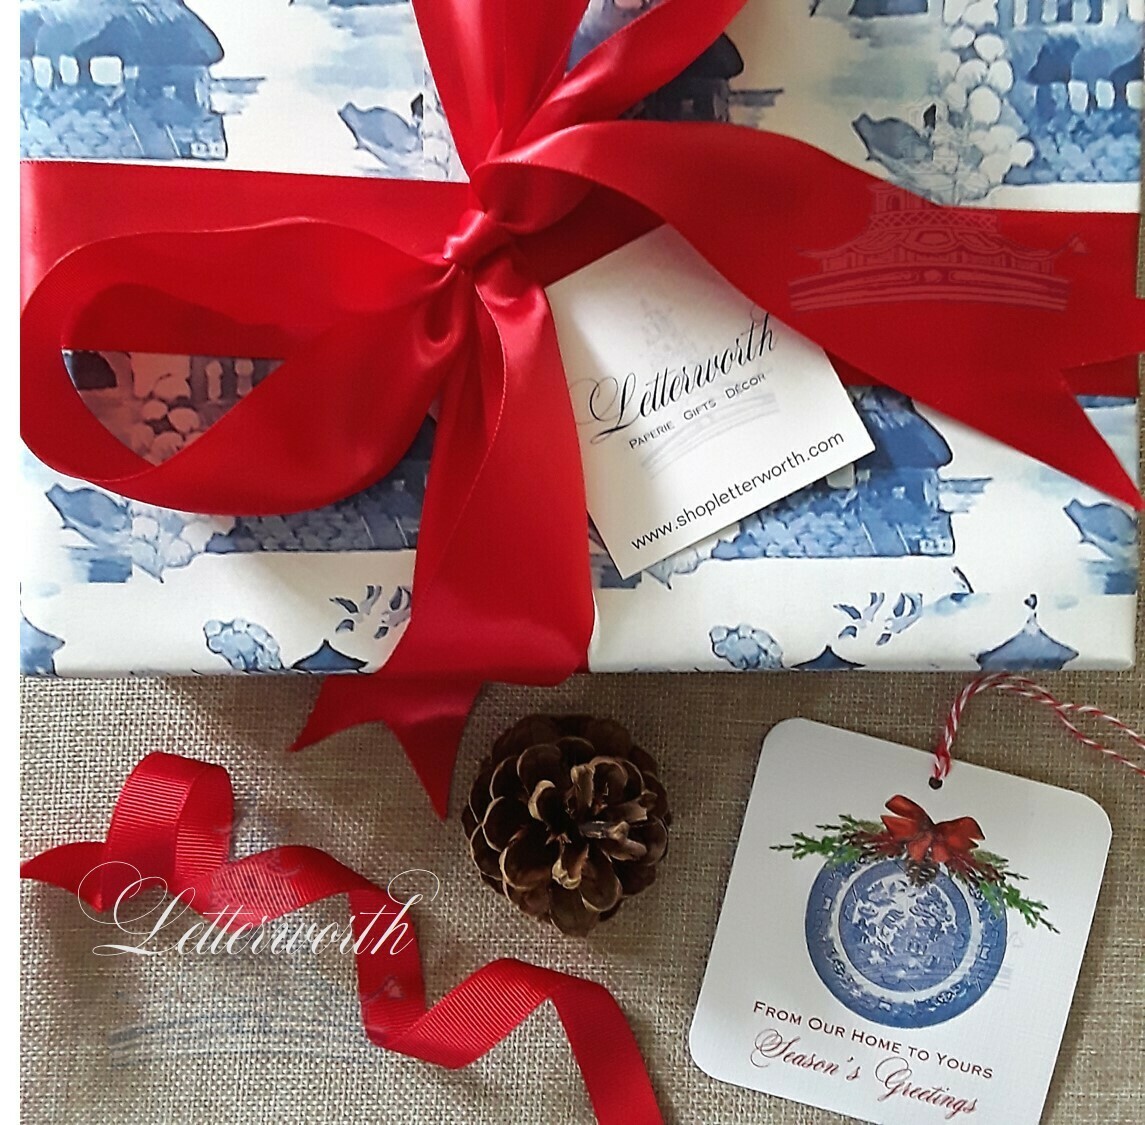 Blue and White Watercolor Willow Toile Gift Wrapping Paper by Letterworth